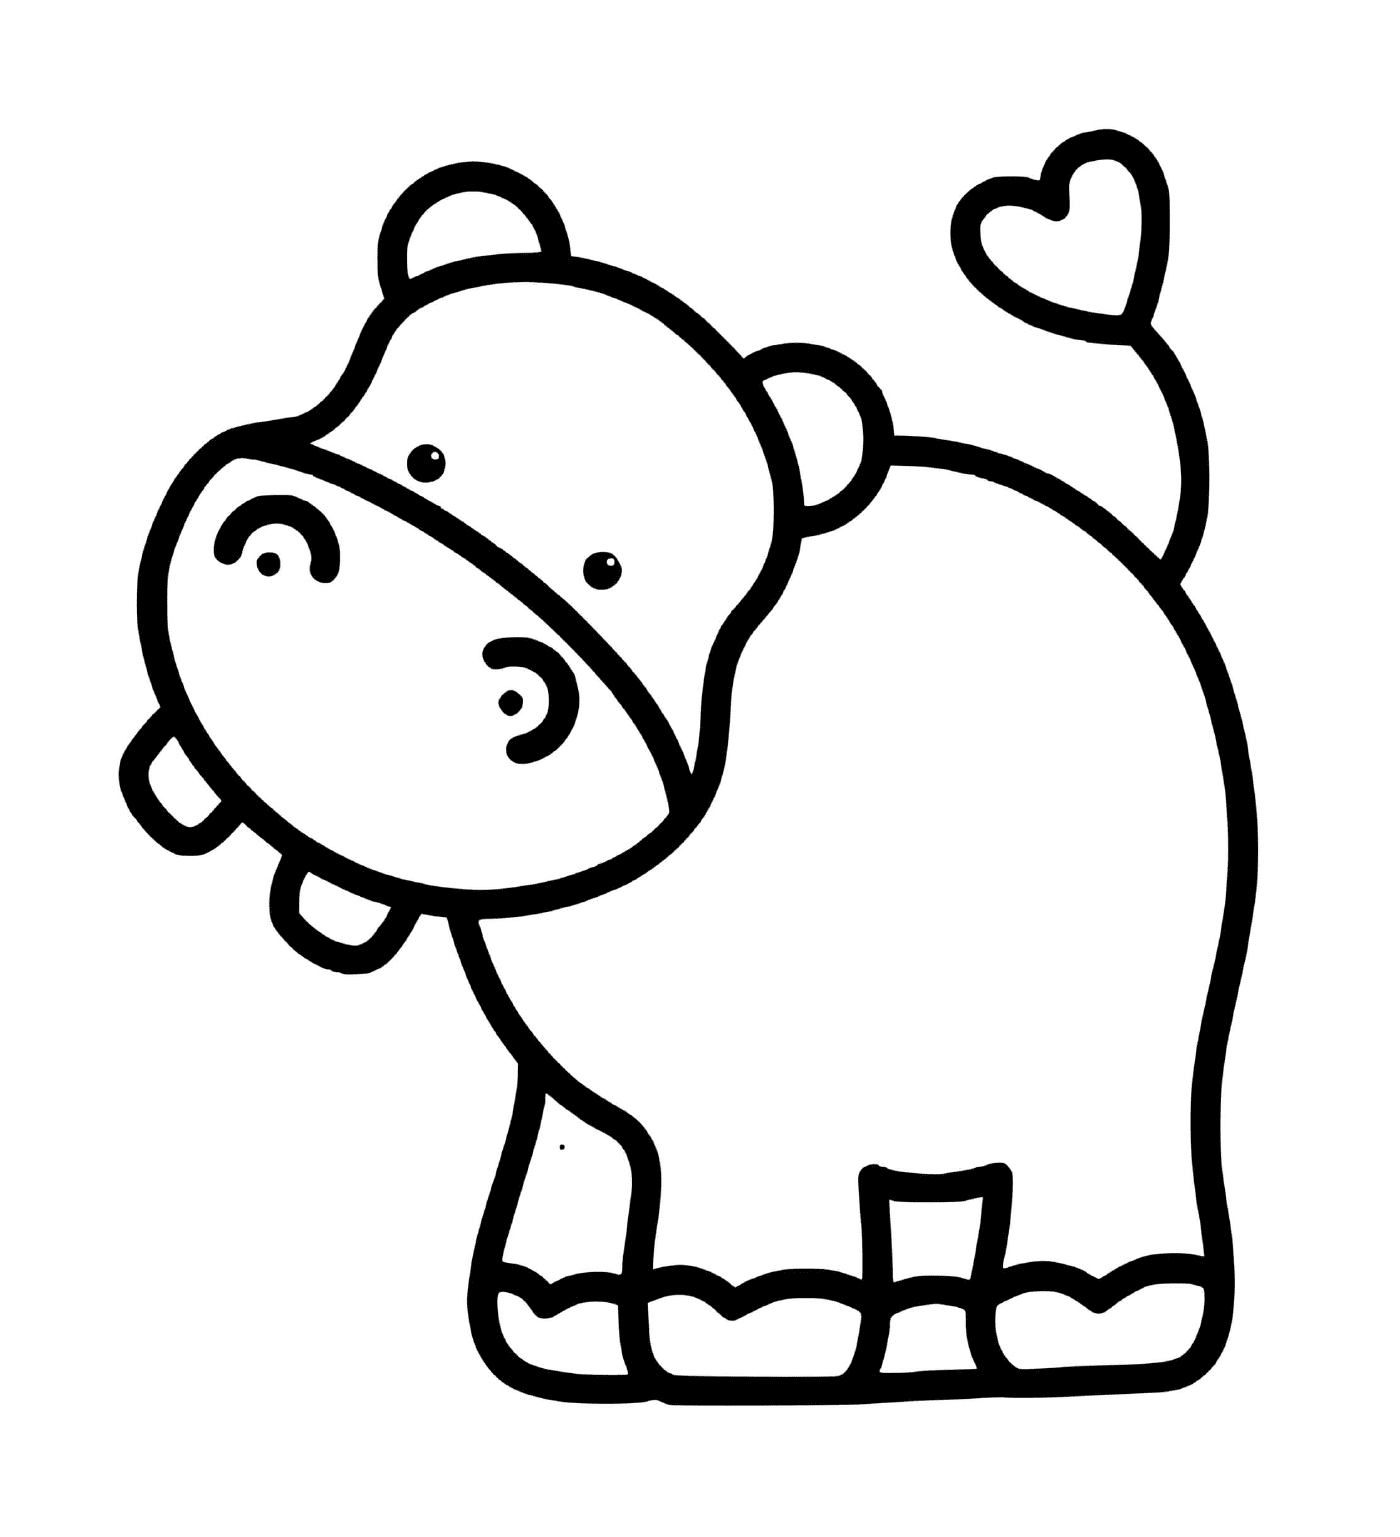  An easy to draw hippopotamus for 2-year-olds 